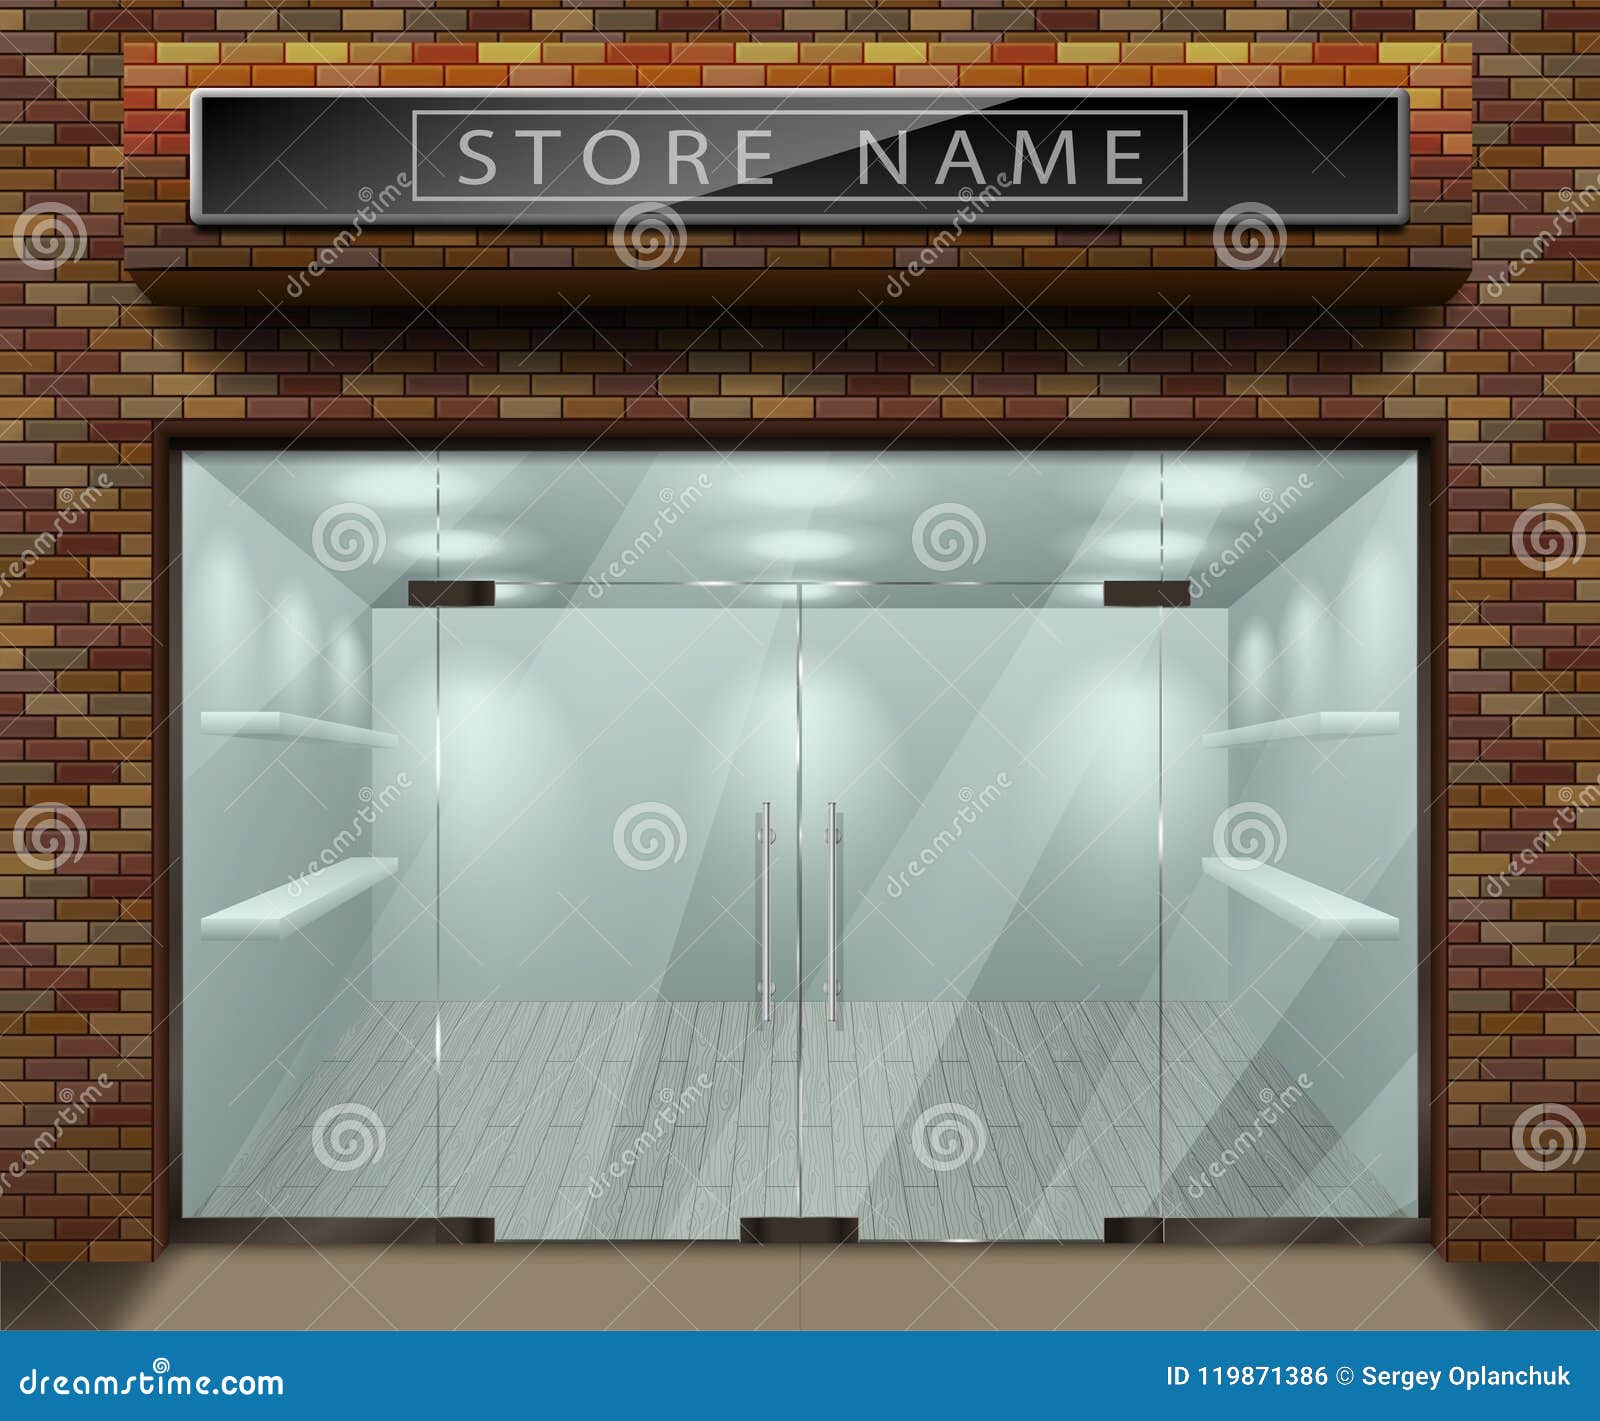 template for advertising 3d store front facade with red brick. exterior empty shop or boutique with transparent window